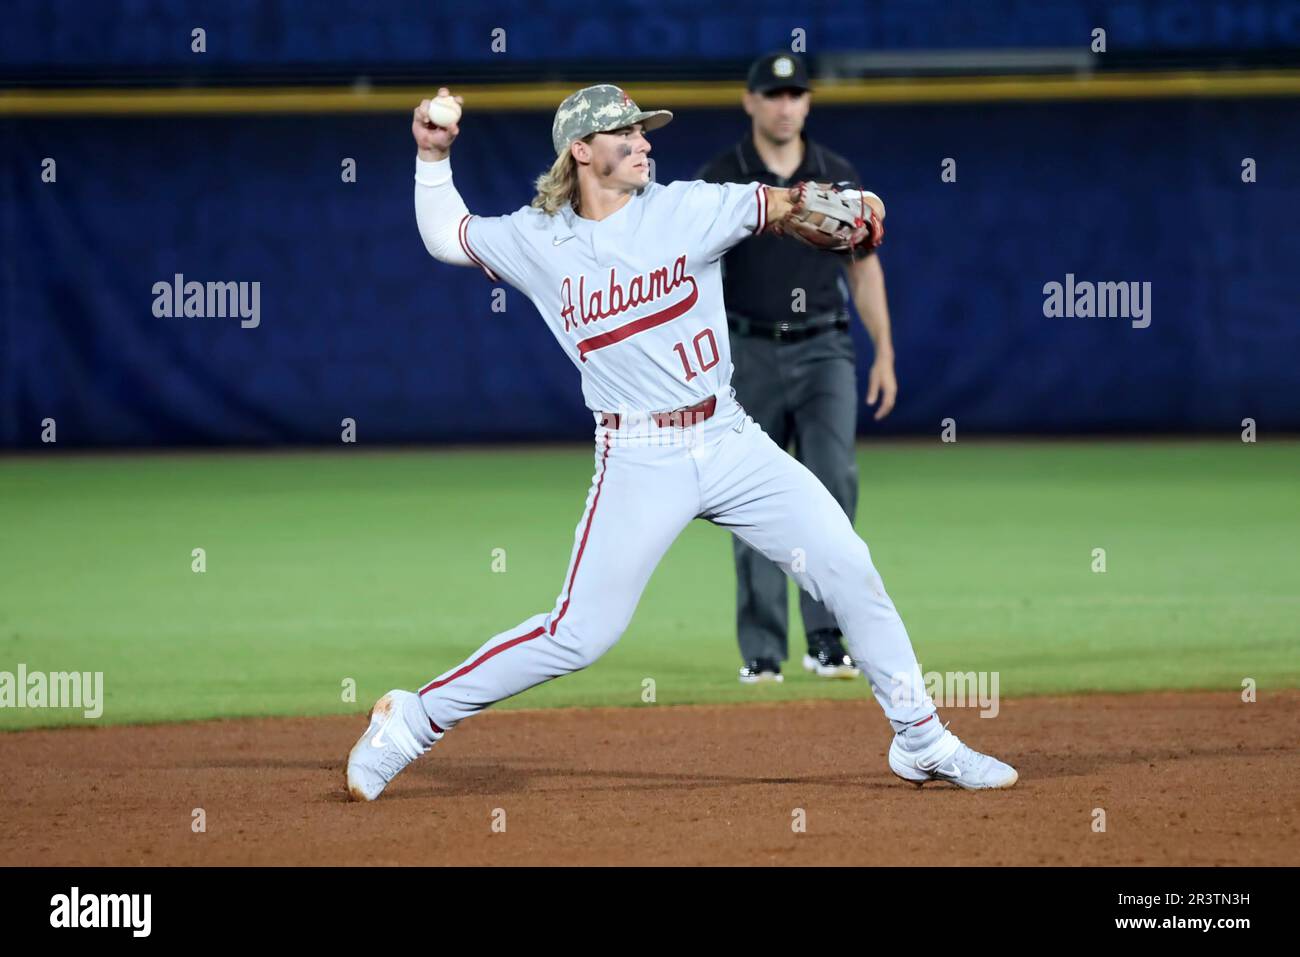 HOOVER, AL - MAY 24: Alabama Crimson Tide outfielder Tommy Seidl (20)  during the 2023 SEC Baseball Tournament game between the Alabama Crimson  Tide and the Florida Gators on May 24, 2023